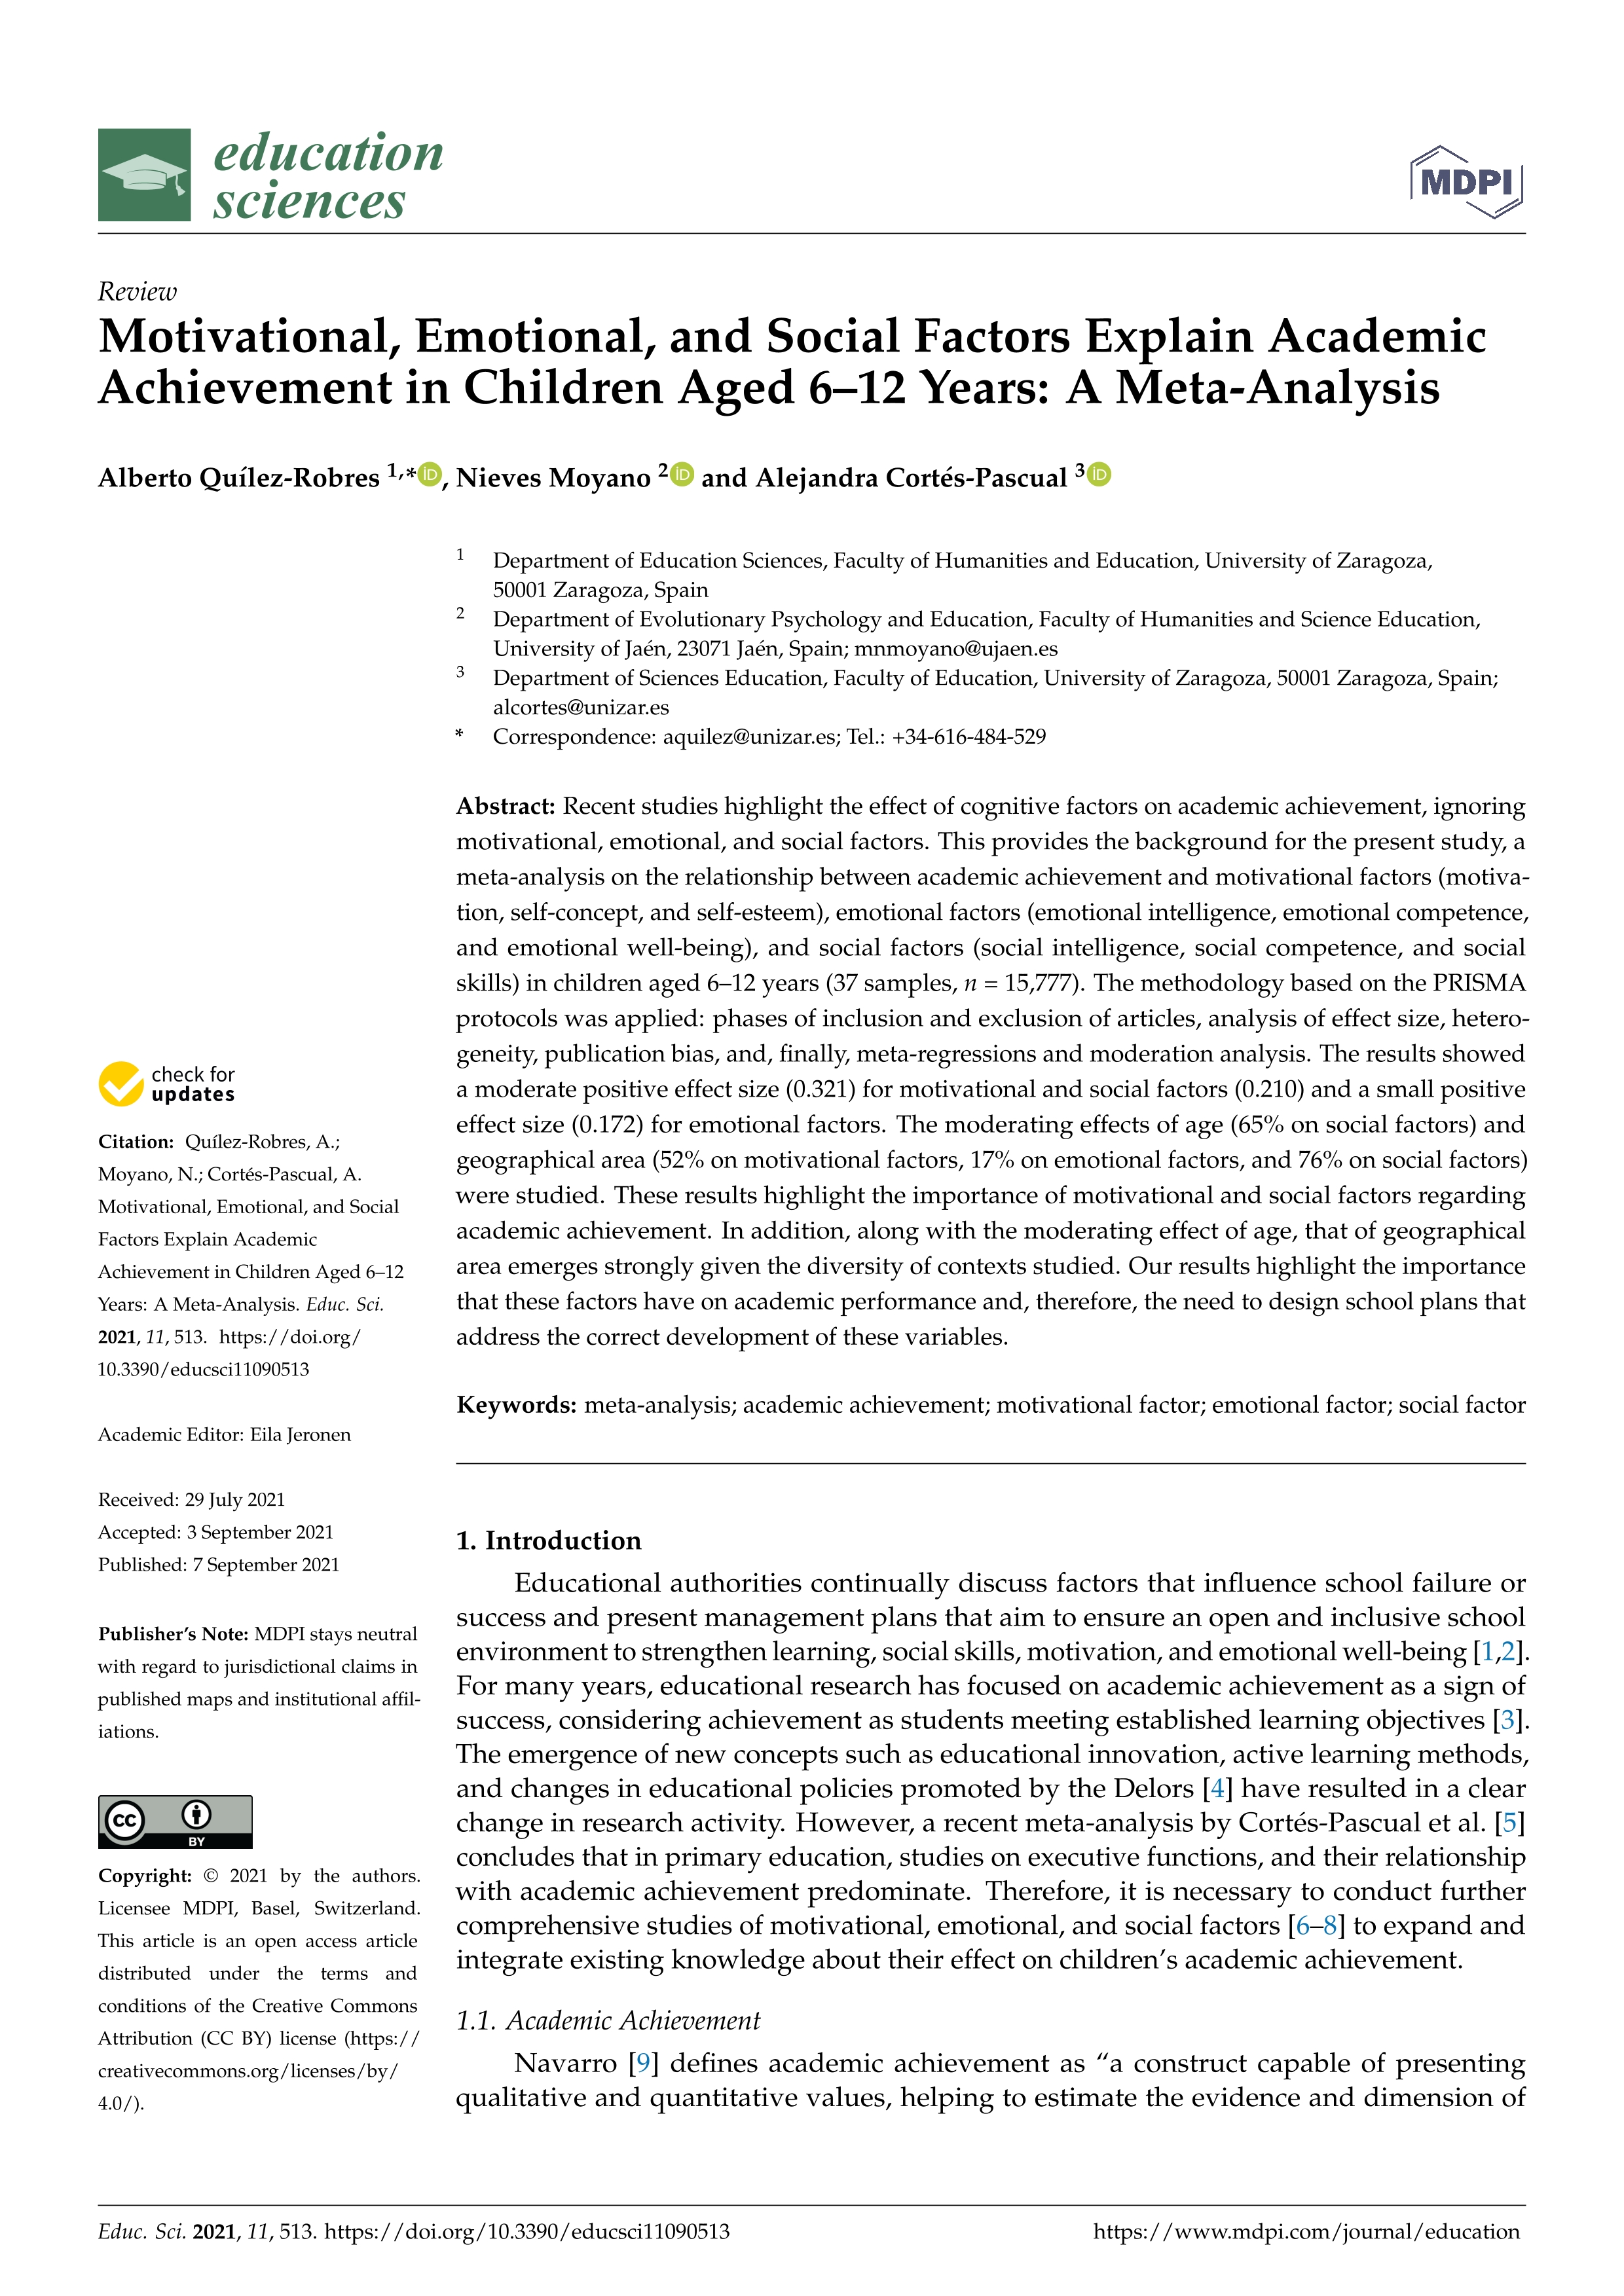 Motivational, emotional, and social factors explain academic achievement in children aged 6–12 years: A meta-analysis